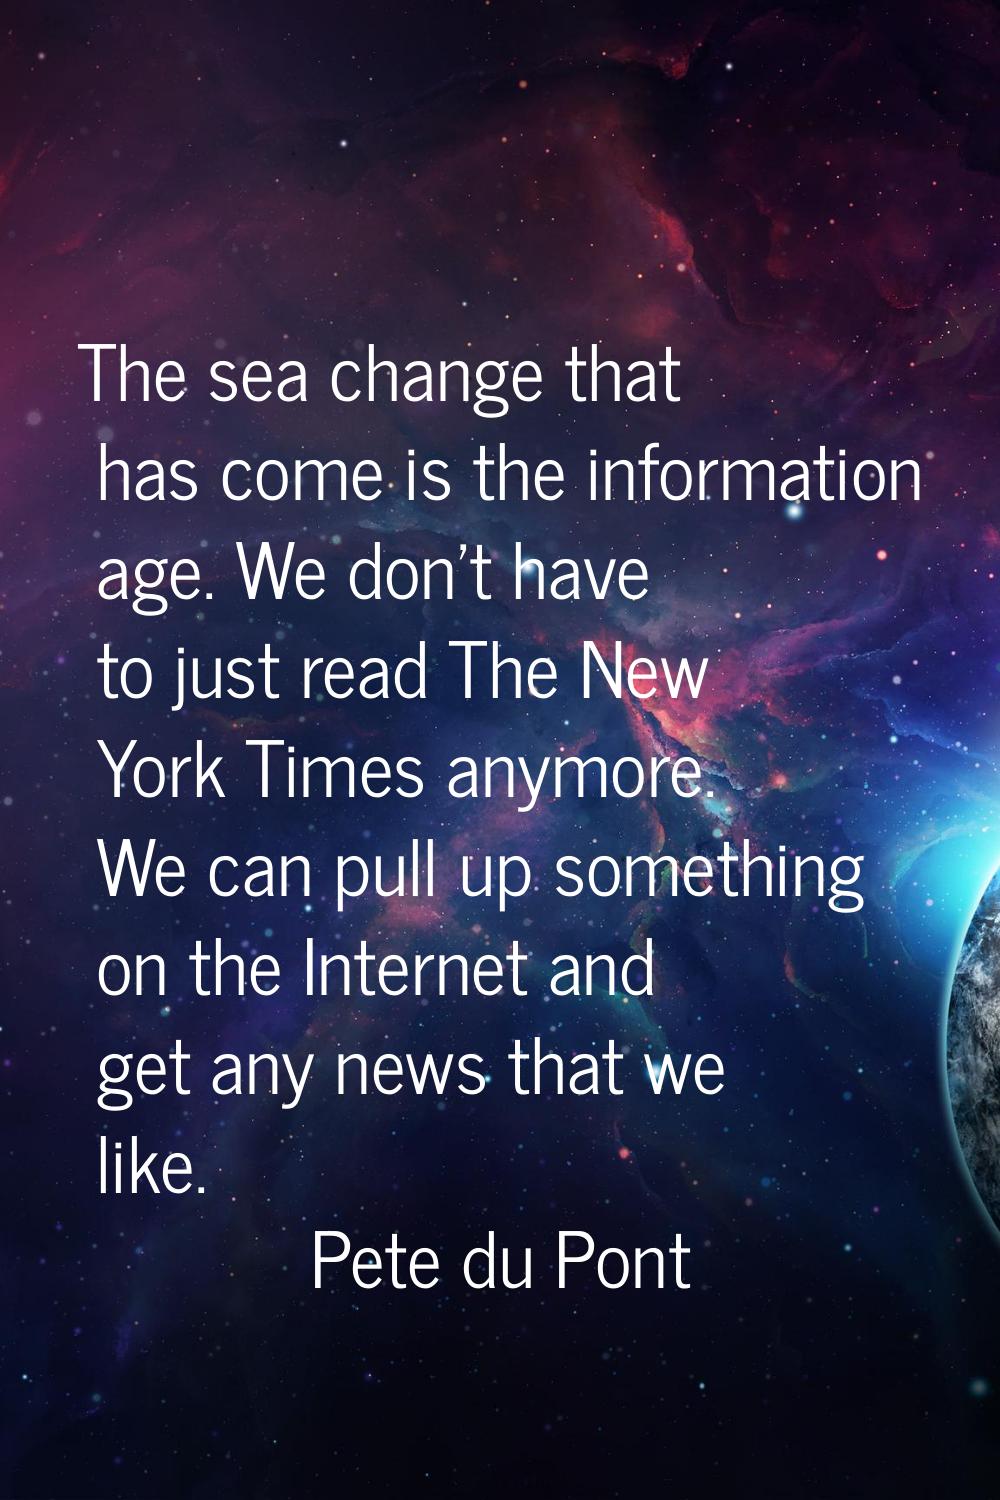 The sea change that has come is the information age. We don't have to just read The New York Times 